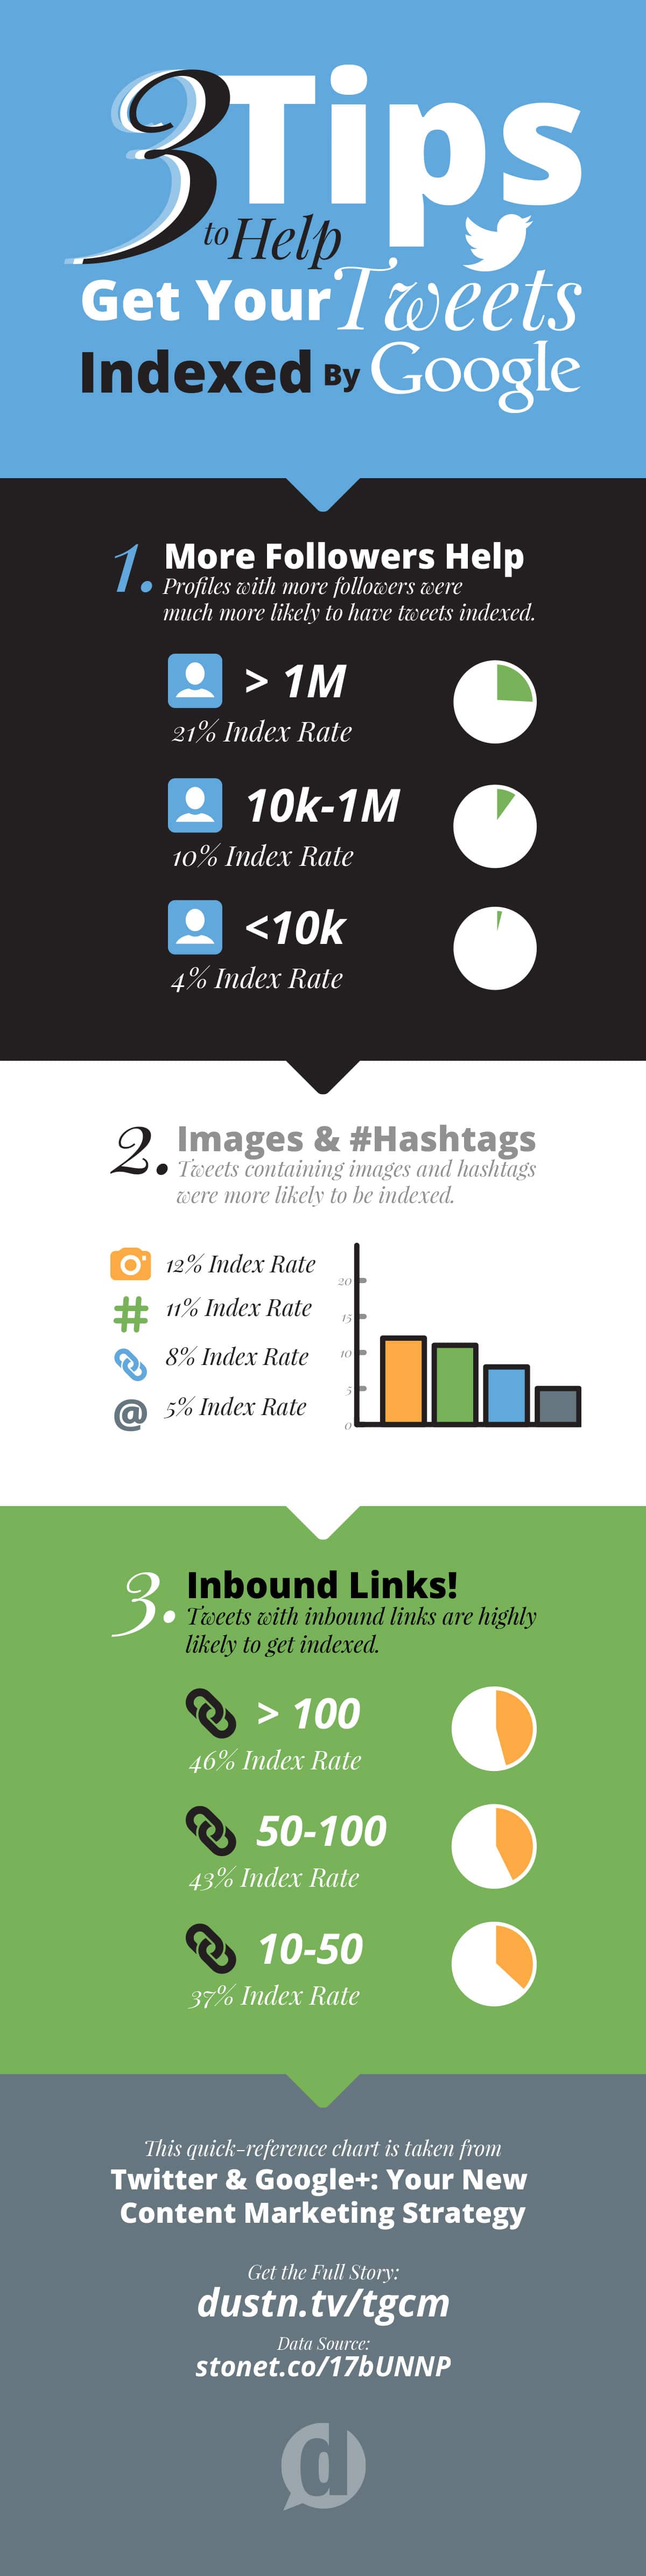 3 Tips to Get Your Tweets Indexed by Google